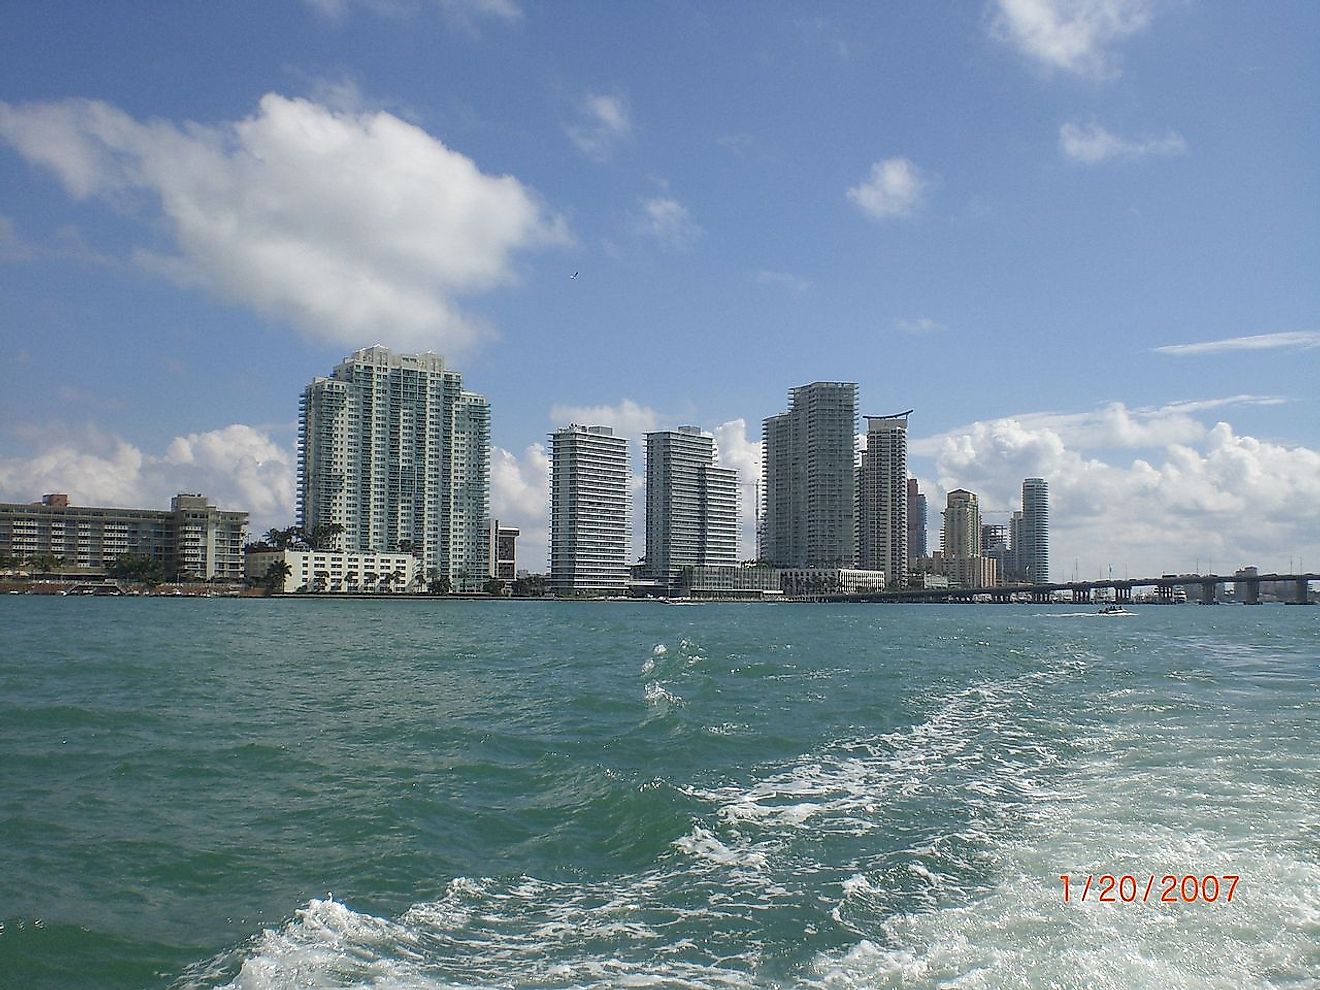 A portion of the southern part of the South Beach skyline as seen from Biscayne Bay. Image credit: Marc Averette/Wikimedia.org